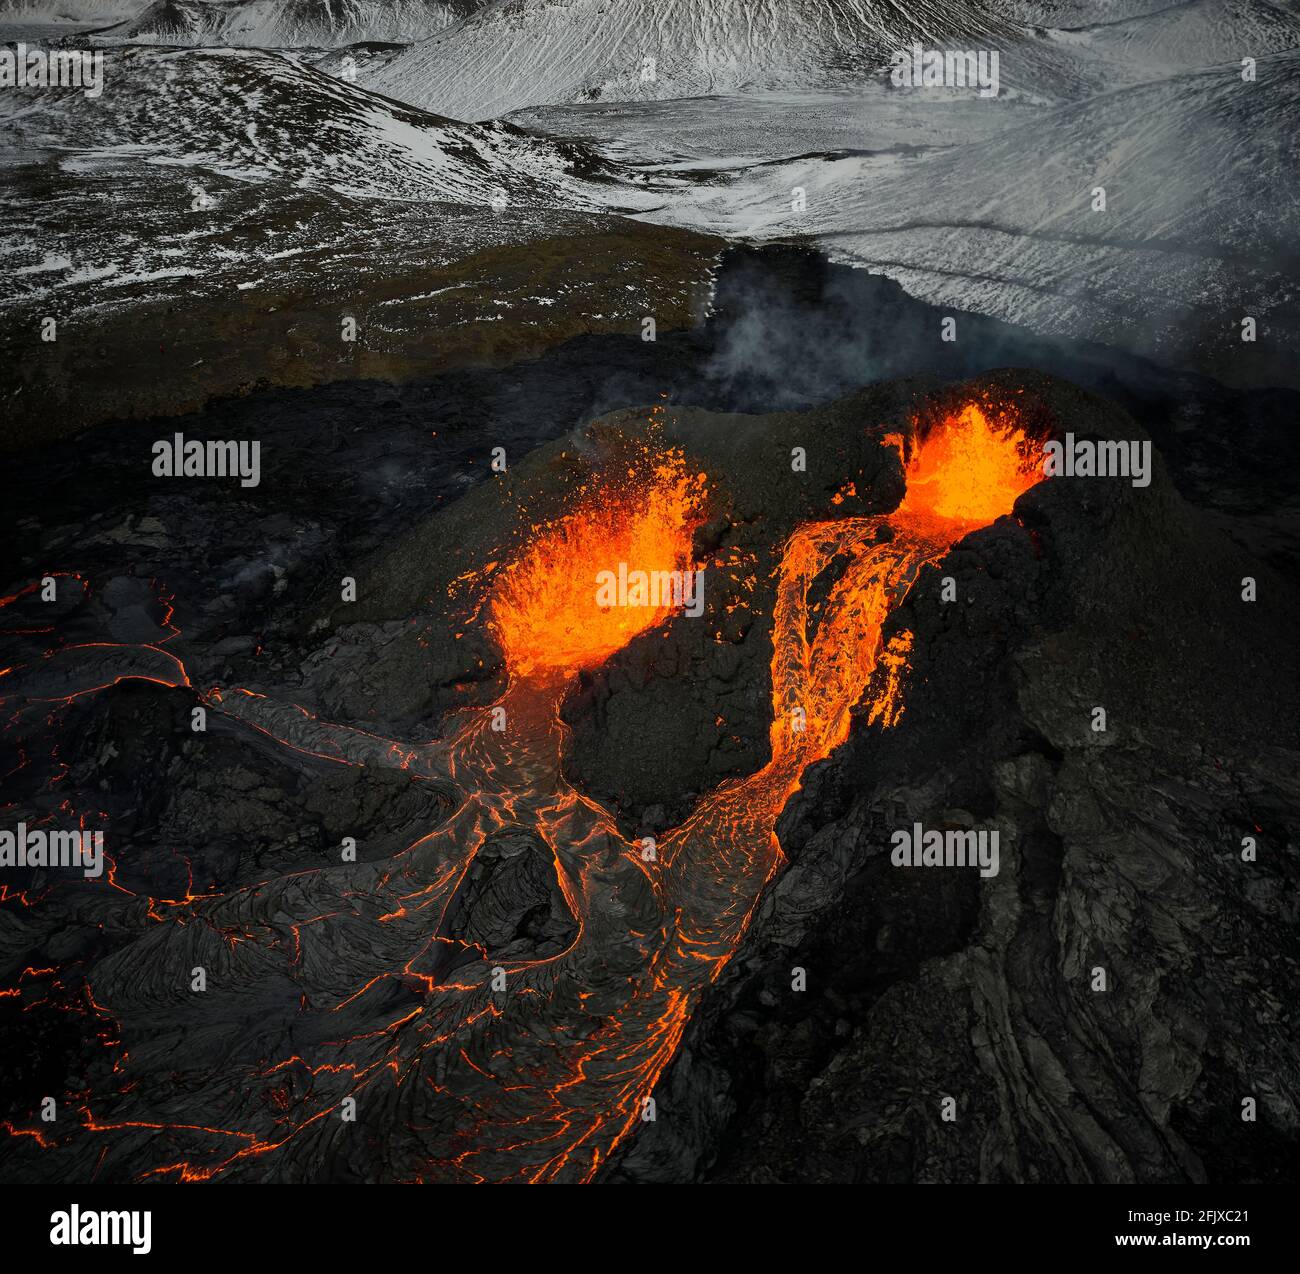 Erupting volcanic mountain with hot lava Stock Photo